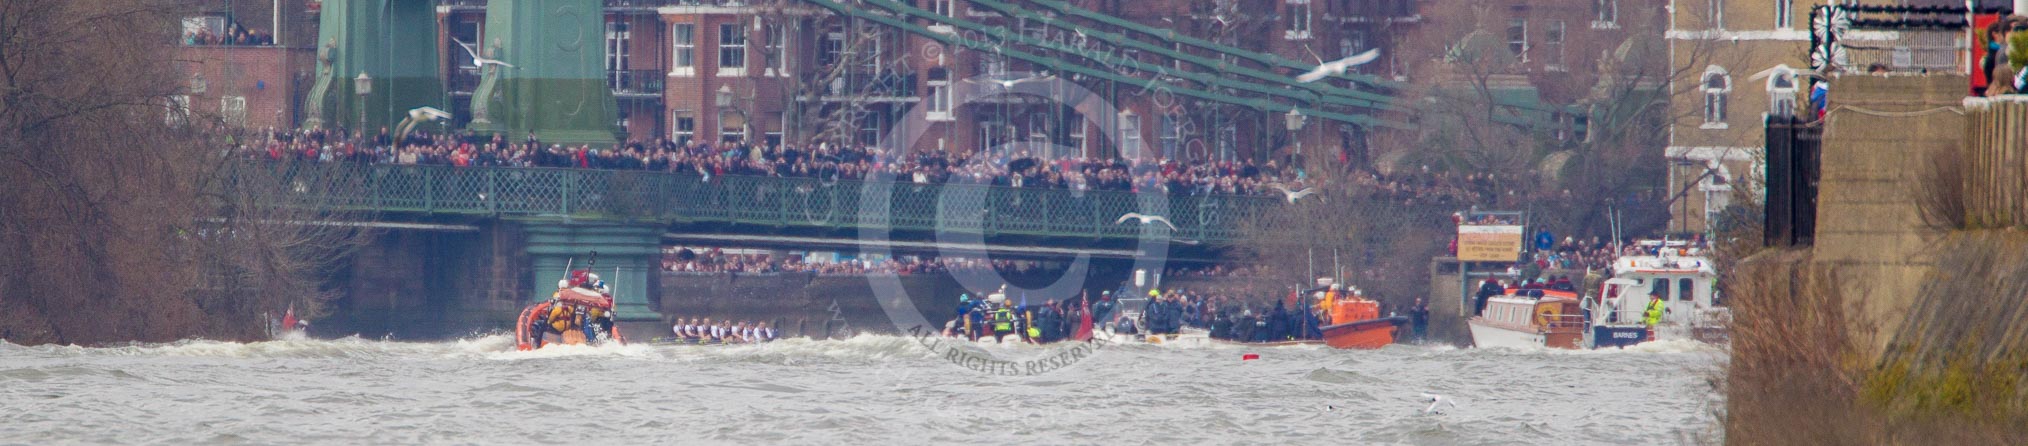 The Boat Race 2013.
Putney,
London SW15,

United Kingdom,
on 31 March 2013 at 16:37, image #347